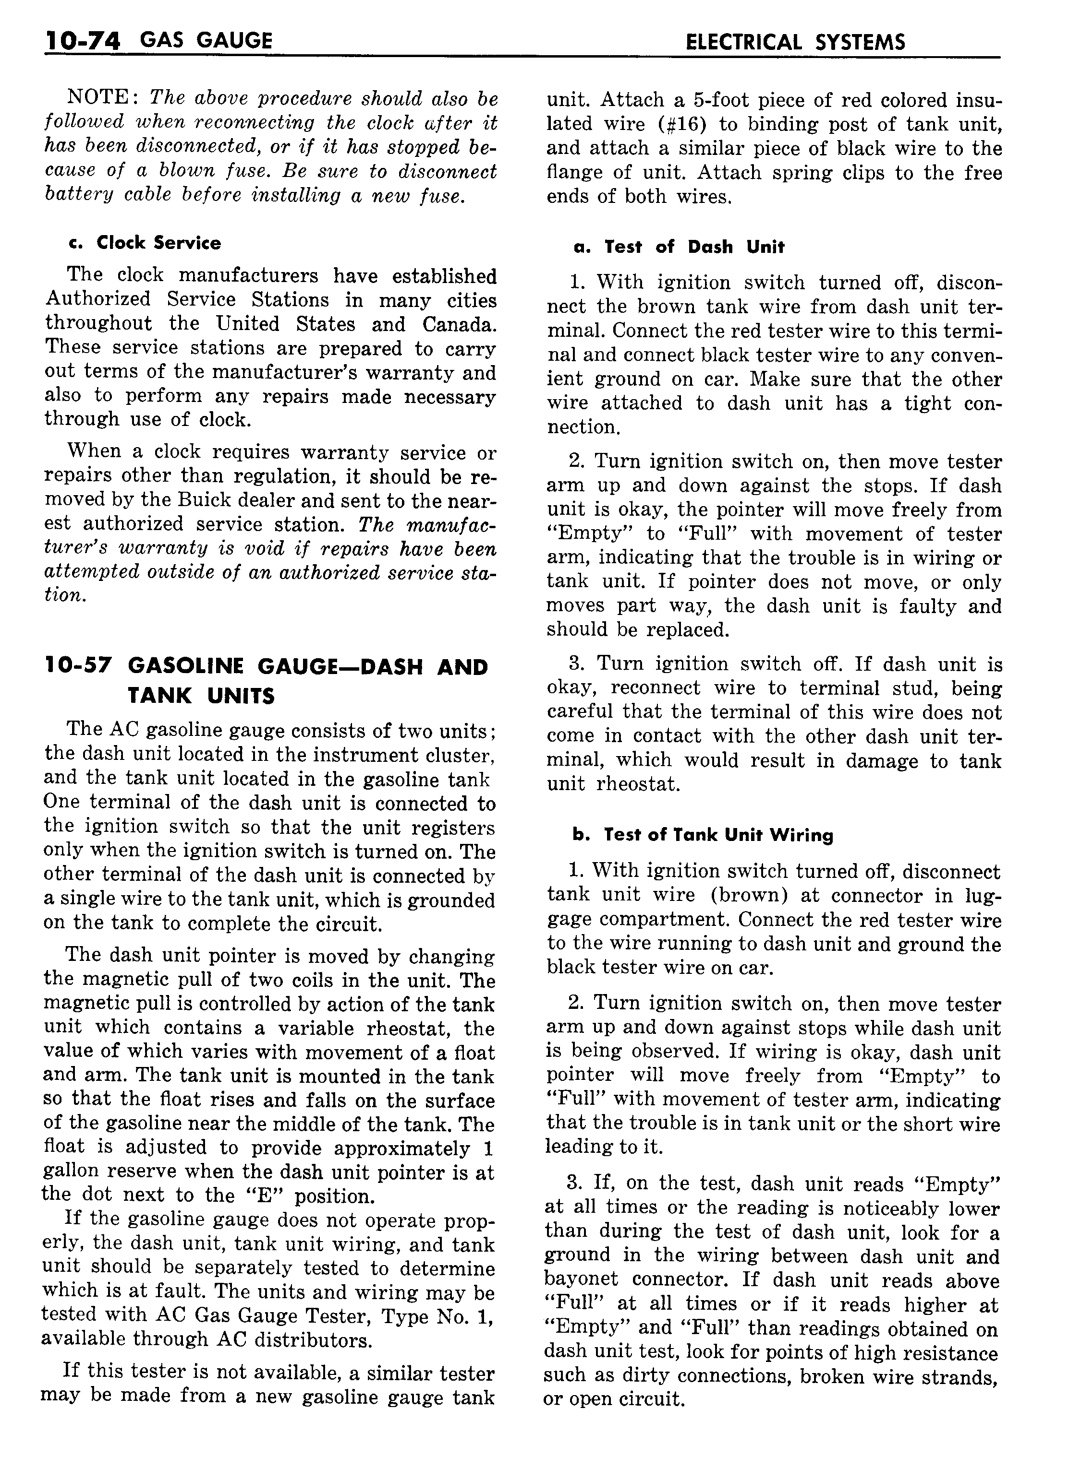 n_11 1957 Buick Shop Manual - Electrical Systems-074-074.jpg